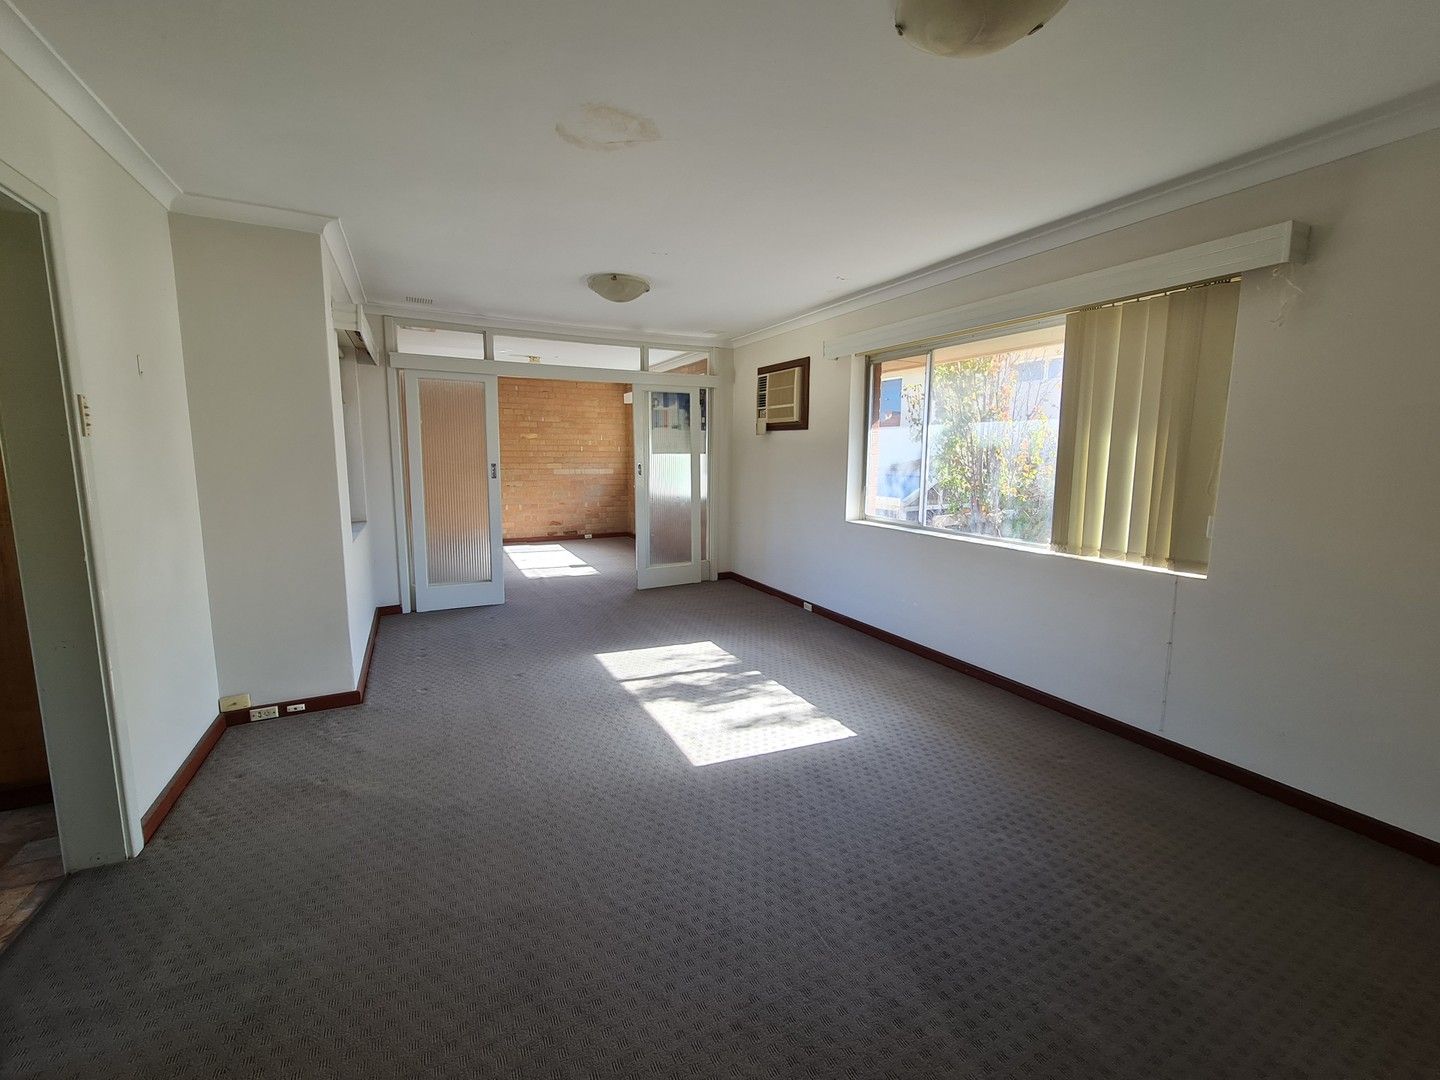 2 bedrooms Apartment / Unit / Flat in 5/410 Stirling Hwy CLAREMONT WA, 6010